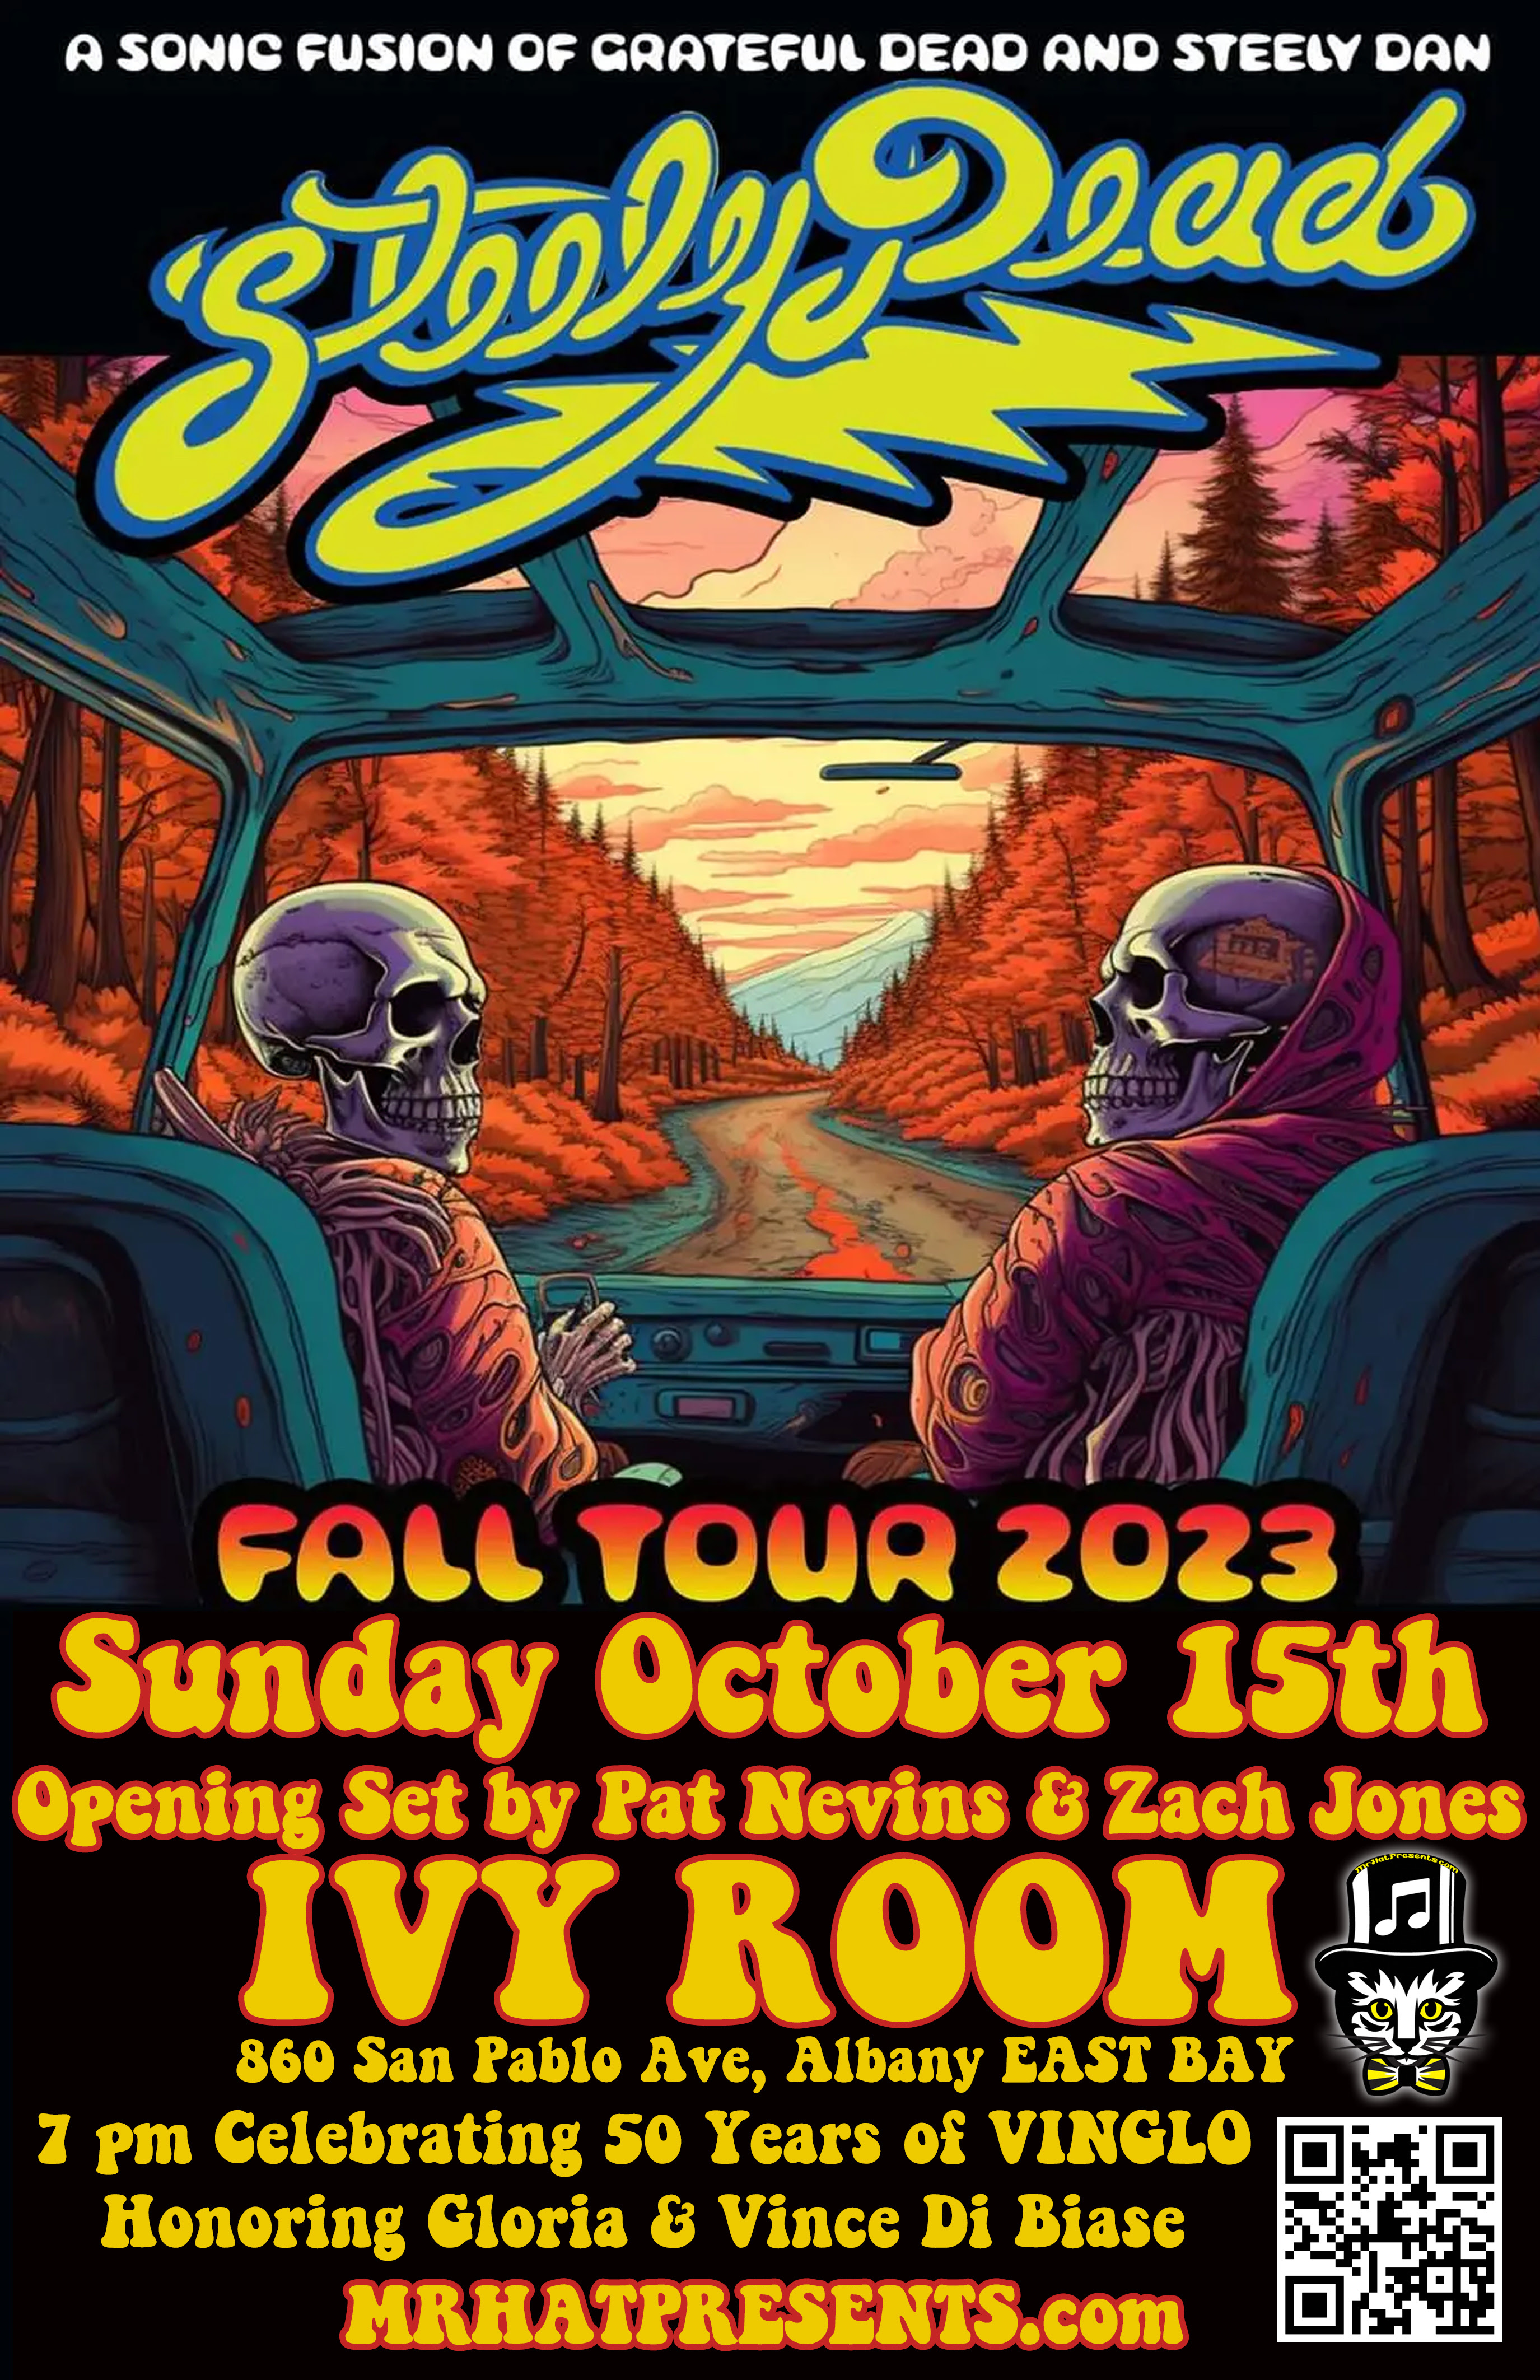 NEVER MISS A SUNDAY SHOW - STEELY DEAD headlines the IVY ROOM on Sunday Night (10/15)